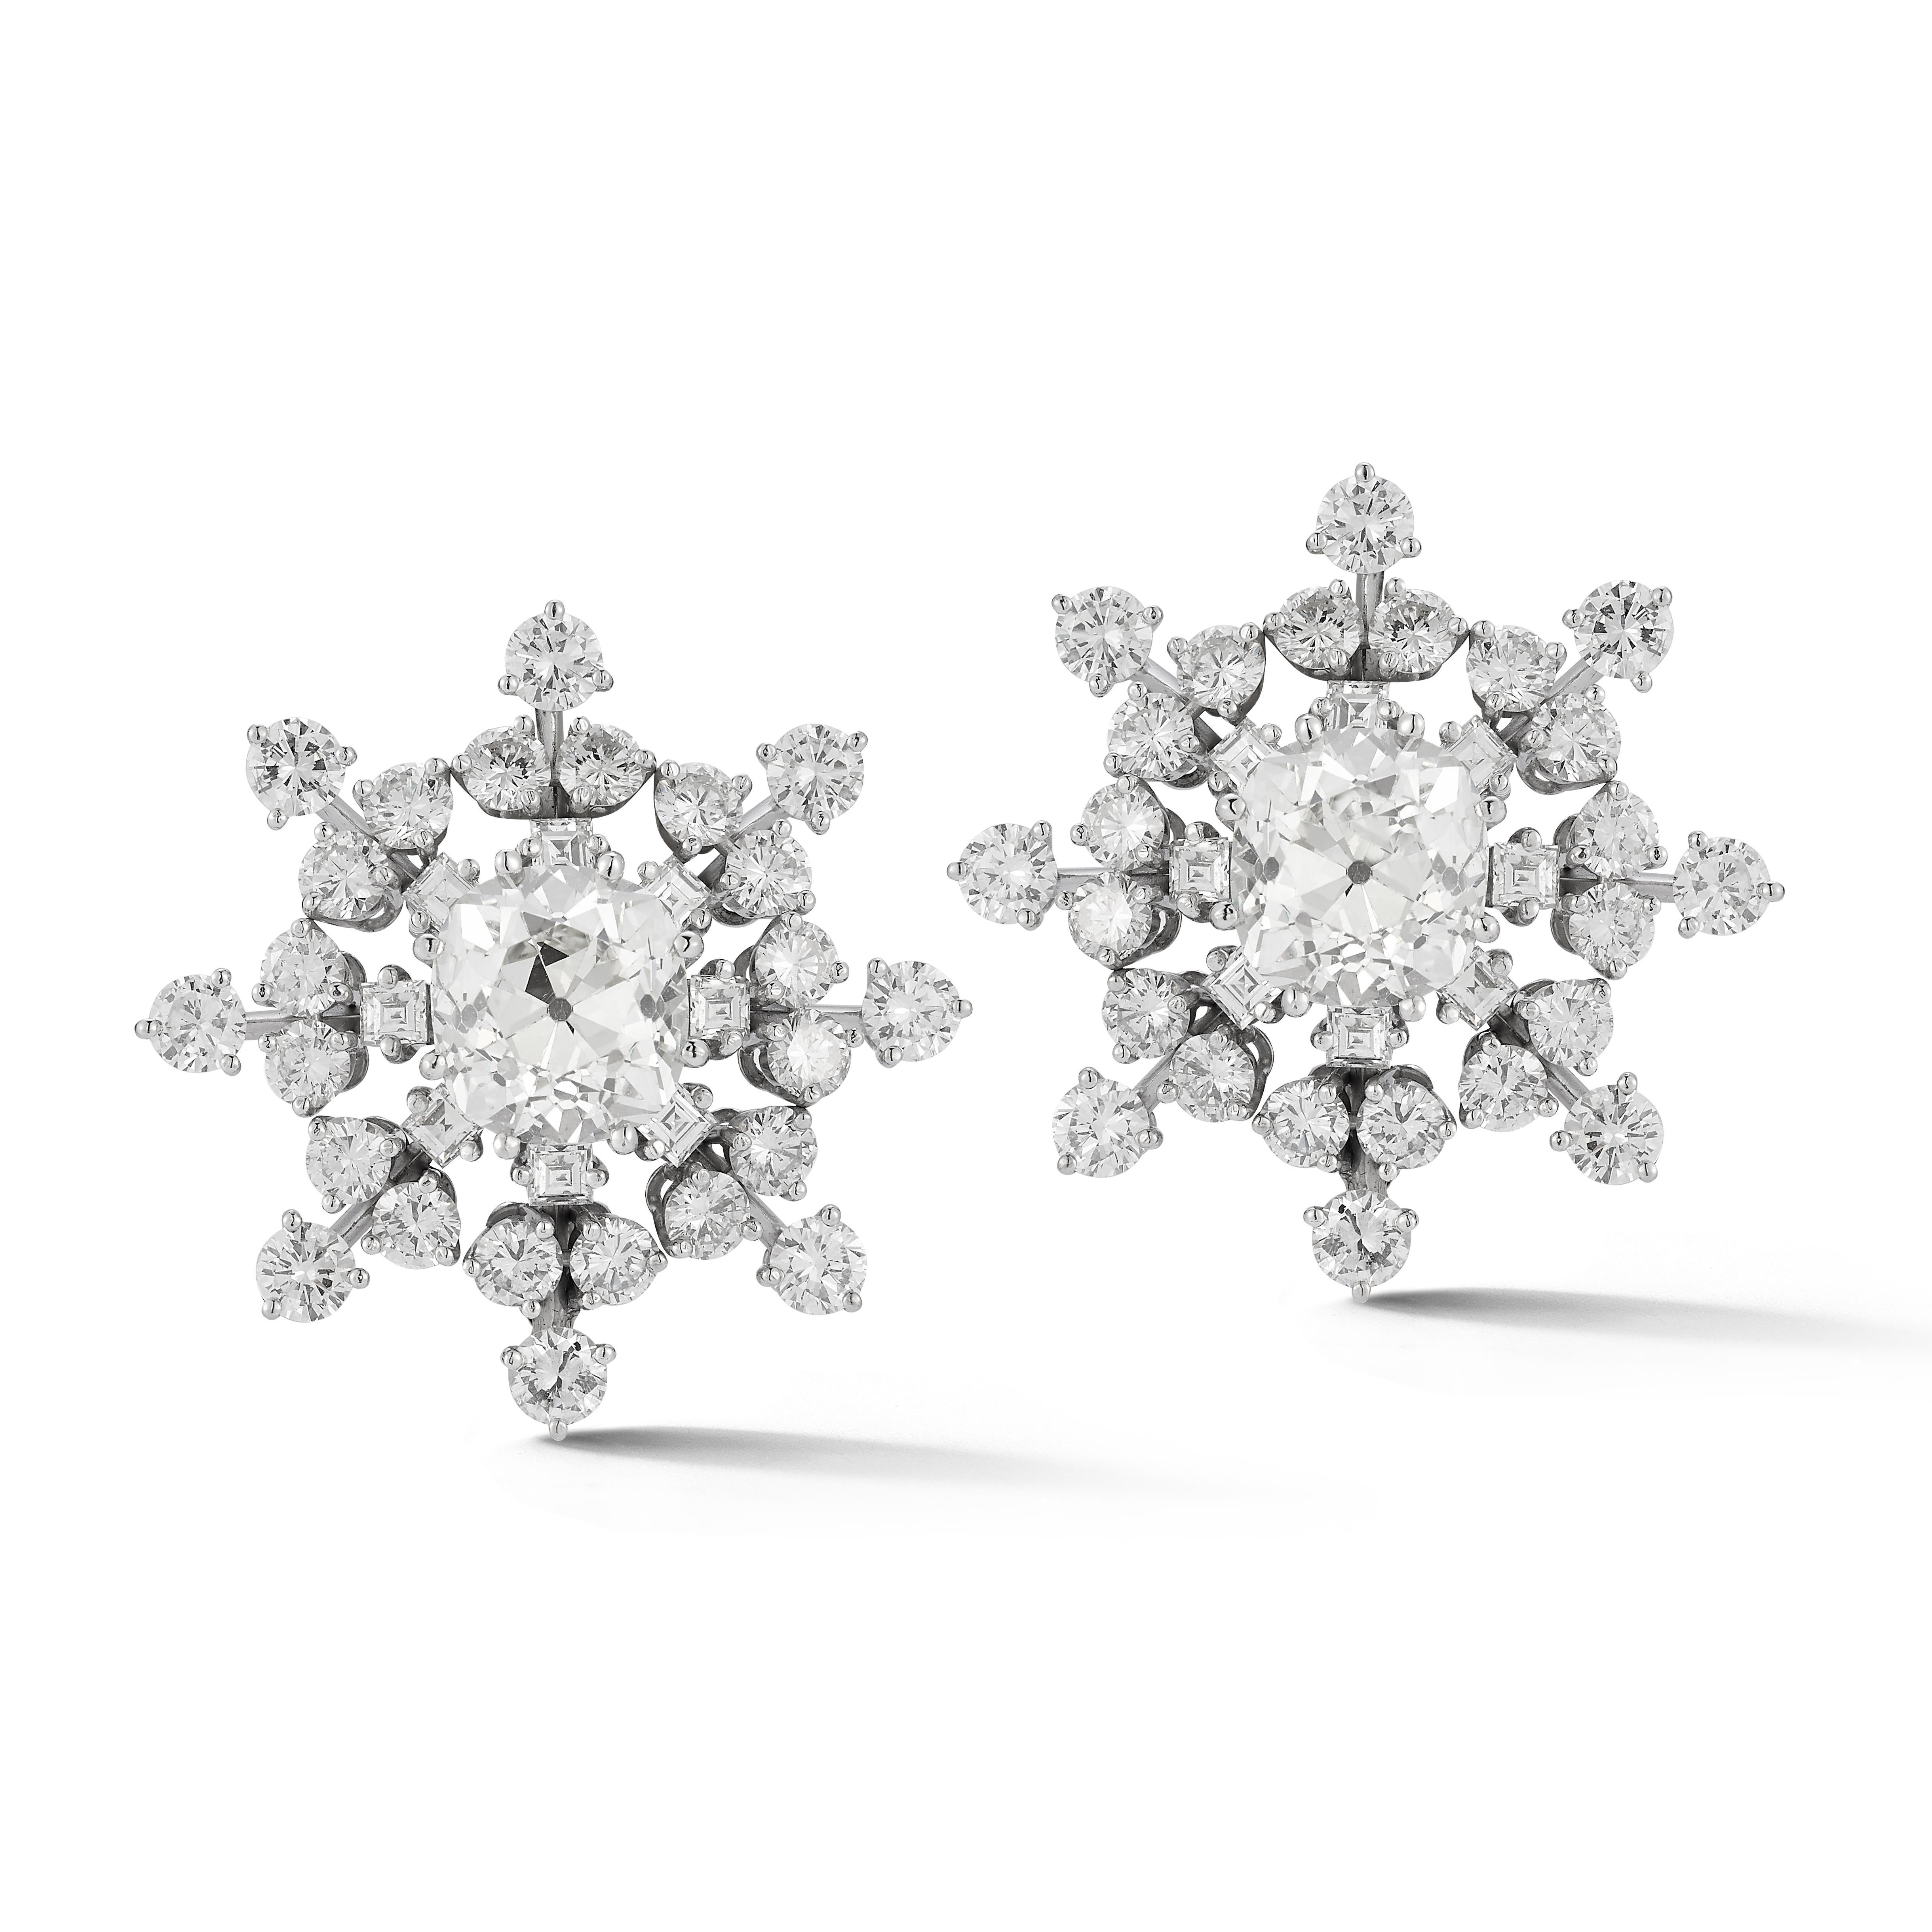 Bulgari Snowflake Diamond Earrings 

A pair of 18 karat white gold snowflake motif earrings each set with a central old European cushion cut diamond framed by 8 square cut diamonds and 24 round cut diamonds

Accompanied by the original box and 2